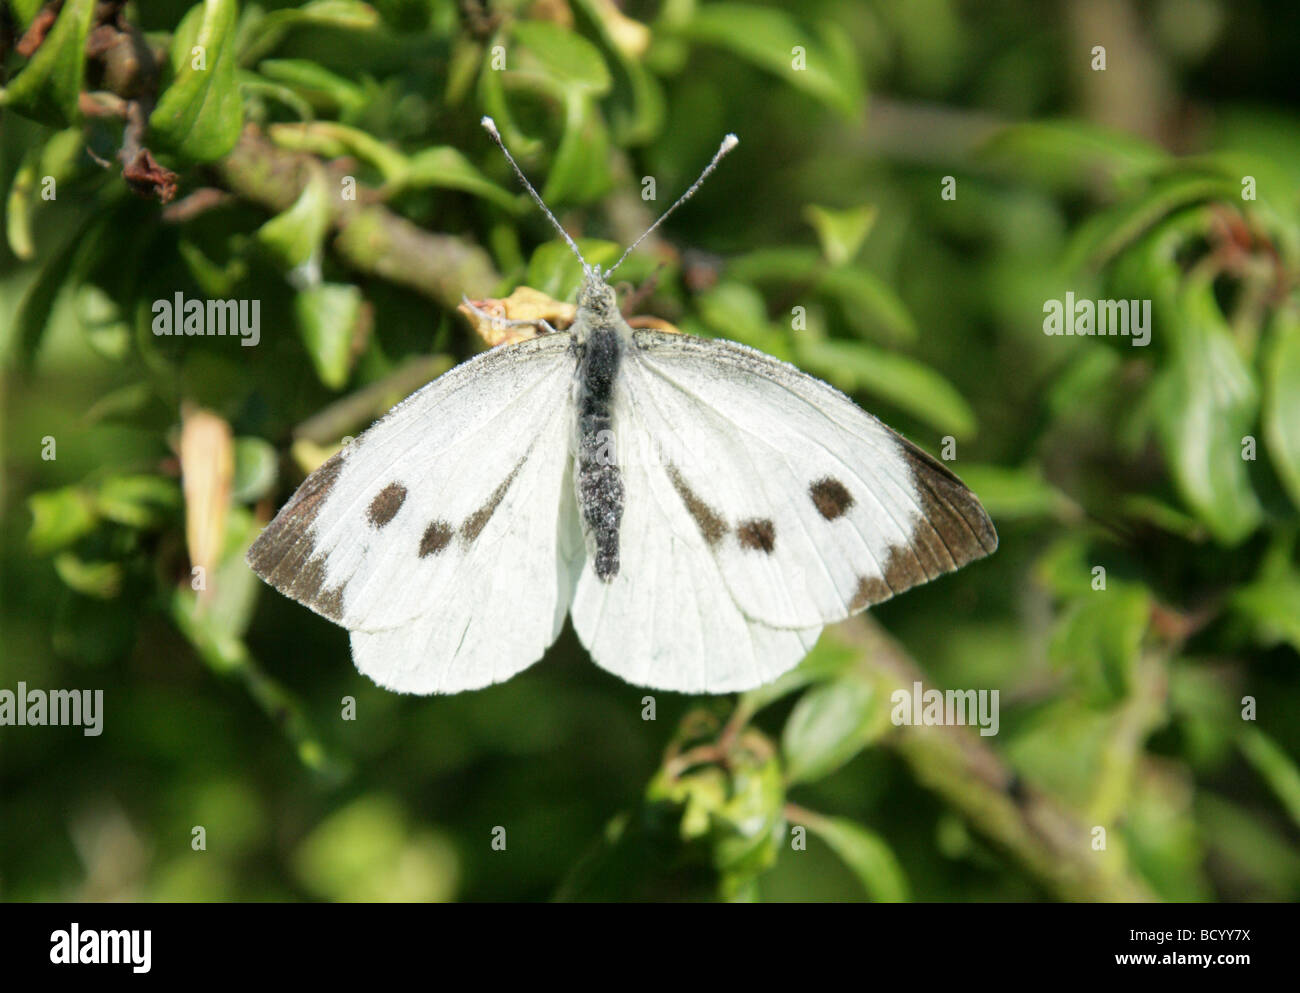 Large White Butterfly or Cabbage White Butterfly, Pieris brassicae, Pieridae, Lepidoptera. Female Stock Photo